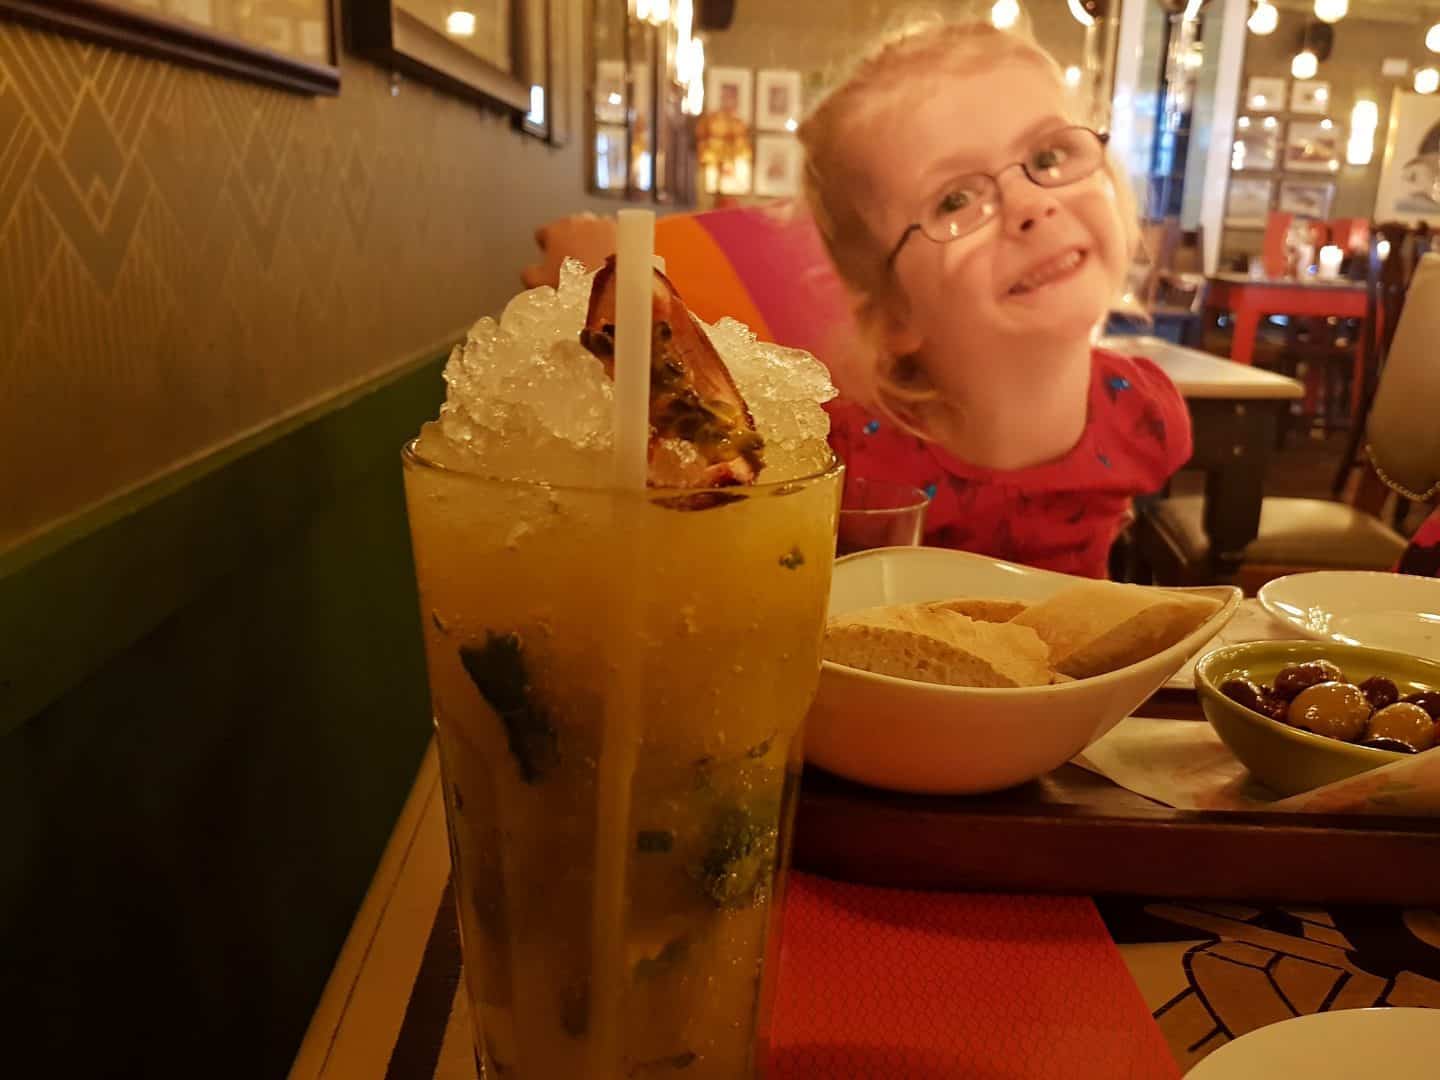 child with vegetarian restaurant meal